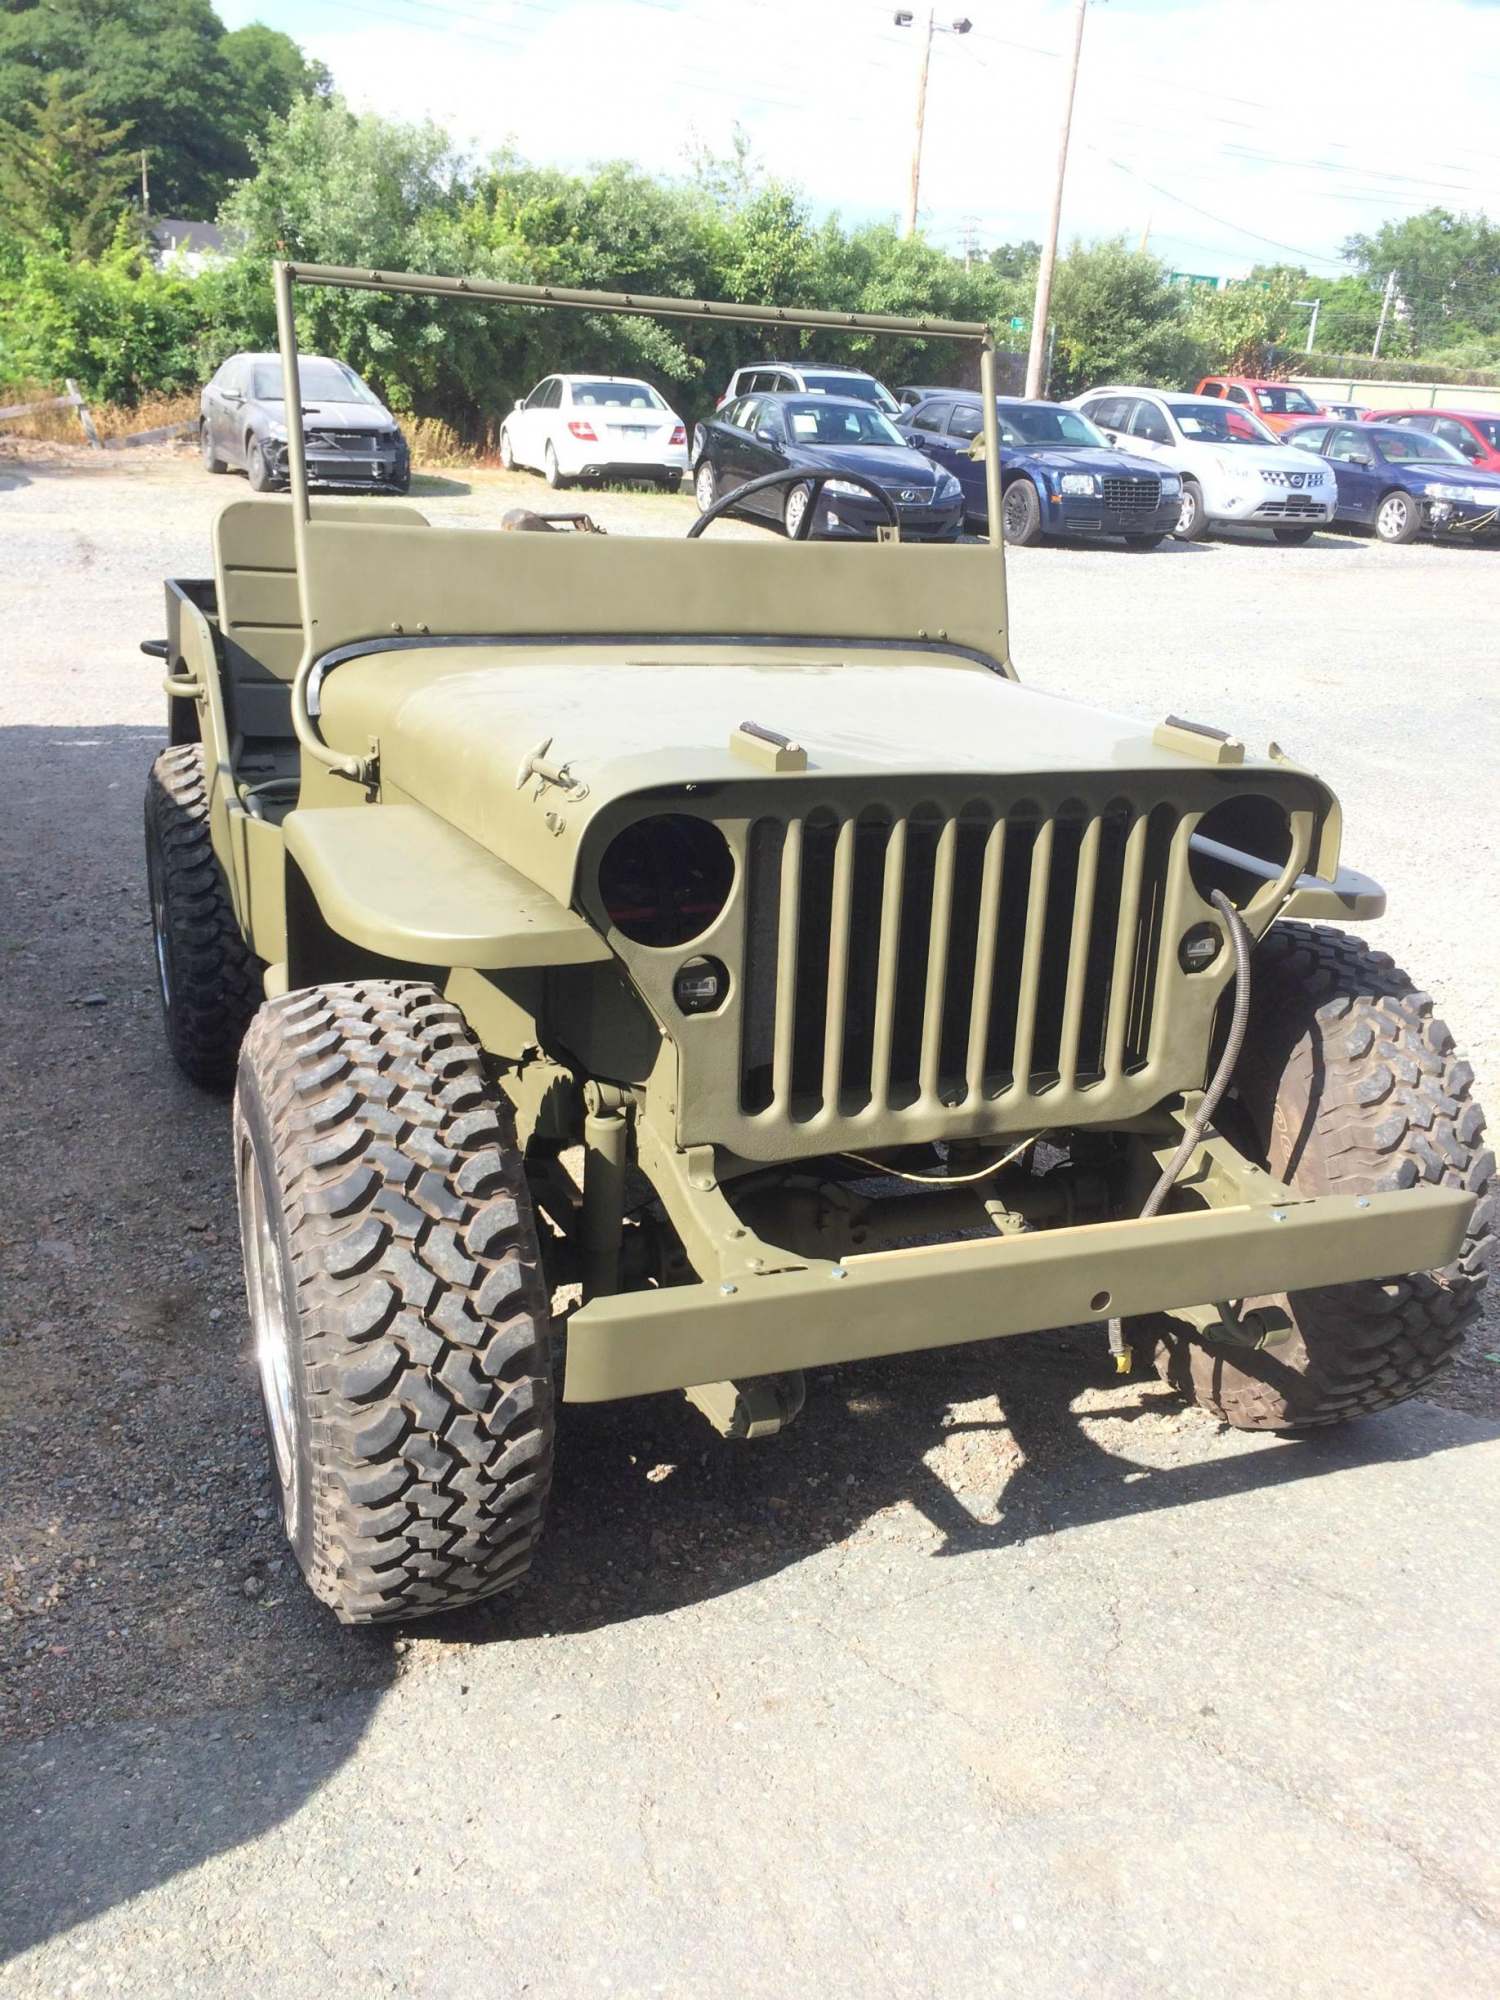 Blackout headlight for MB? - The CJ2A Page Forums